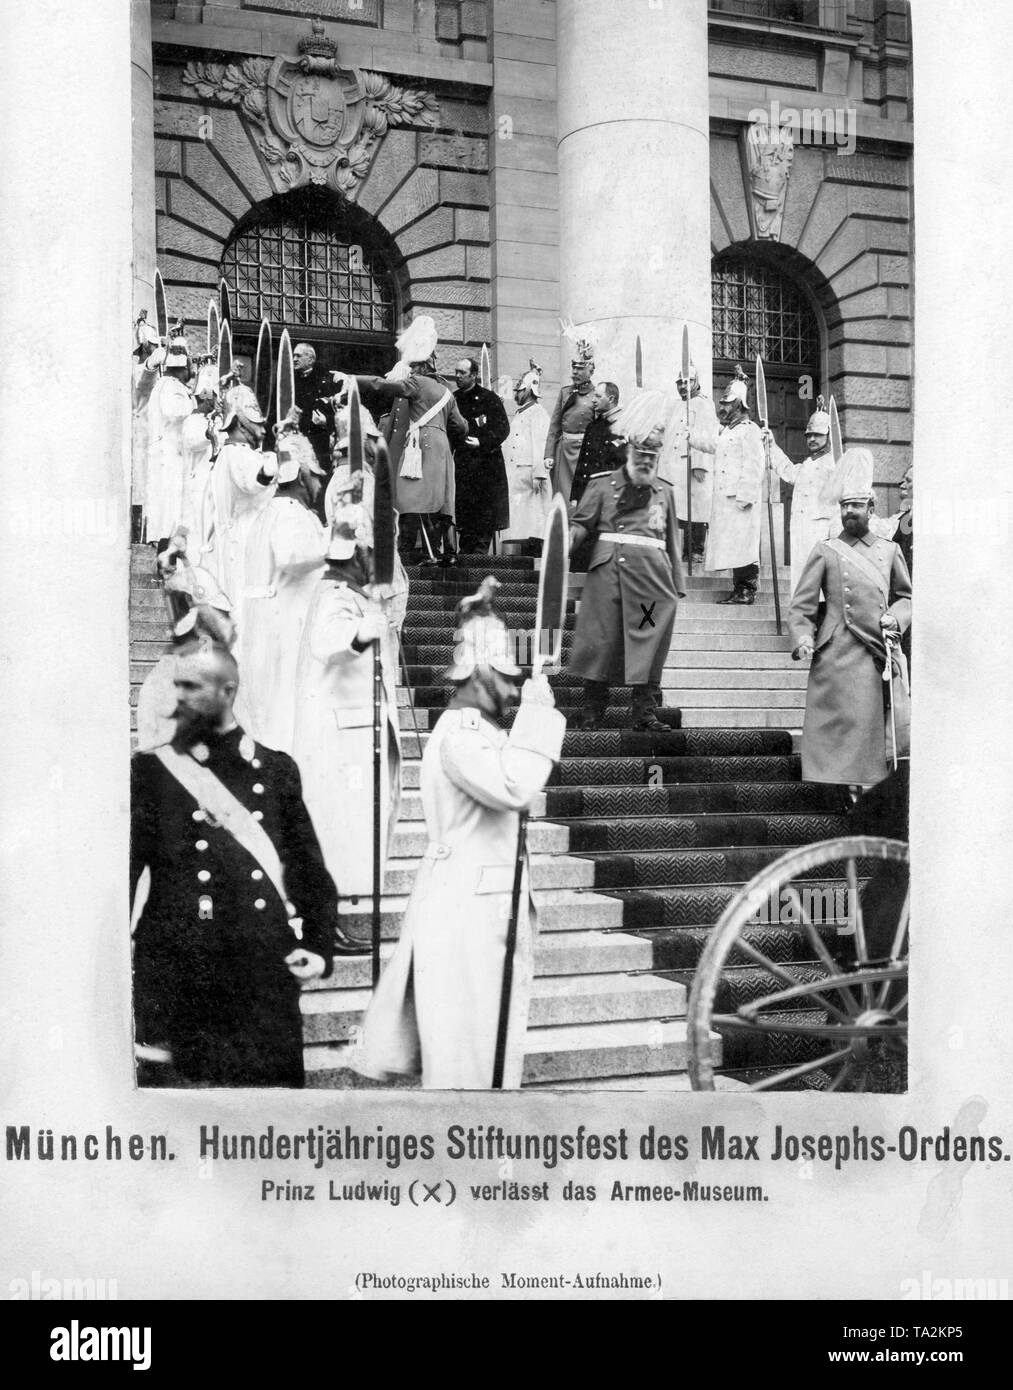 This photograph shows Prince Ludwig, later King Ludwig III of Bavaria (middle) leaving the Army Museum on the occasion of the Centennial Stiftungsfest (Founder's Day) of the Military Order of Max Joseph. It is the highest military order of merit, which was founded in 1806 by the Bavarian king Maximilian I Joseph. The duty of each member of the order was the 'bravery for the Fatherland'. The medal was a gold and white Maltese cross. Bavarian owners of this order were also appointed to the non-inheritable nobility and thus became 'Knights of'. Stock Photo